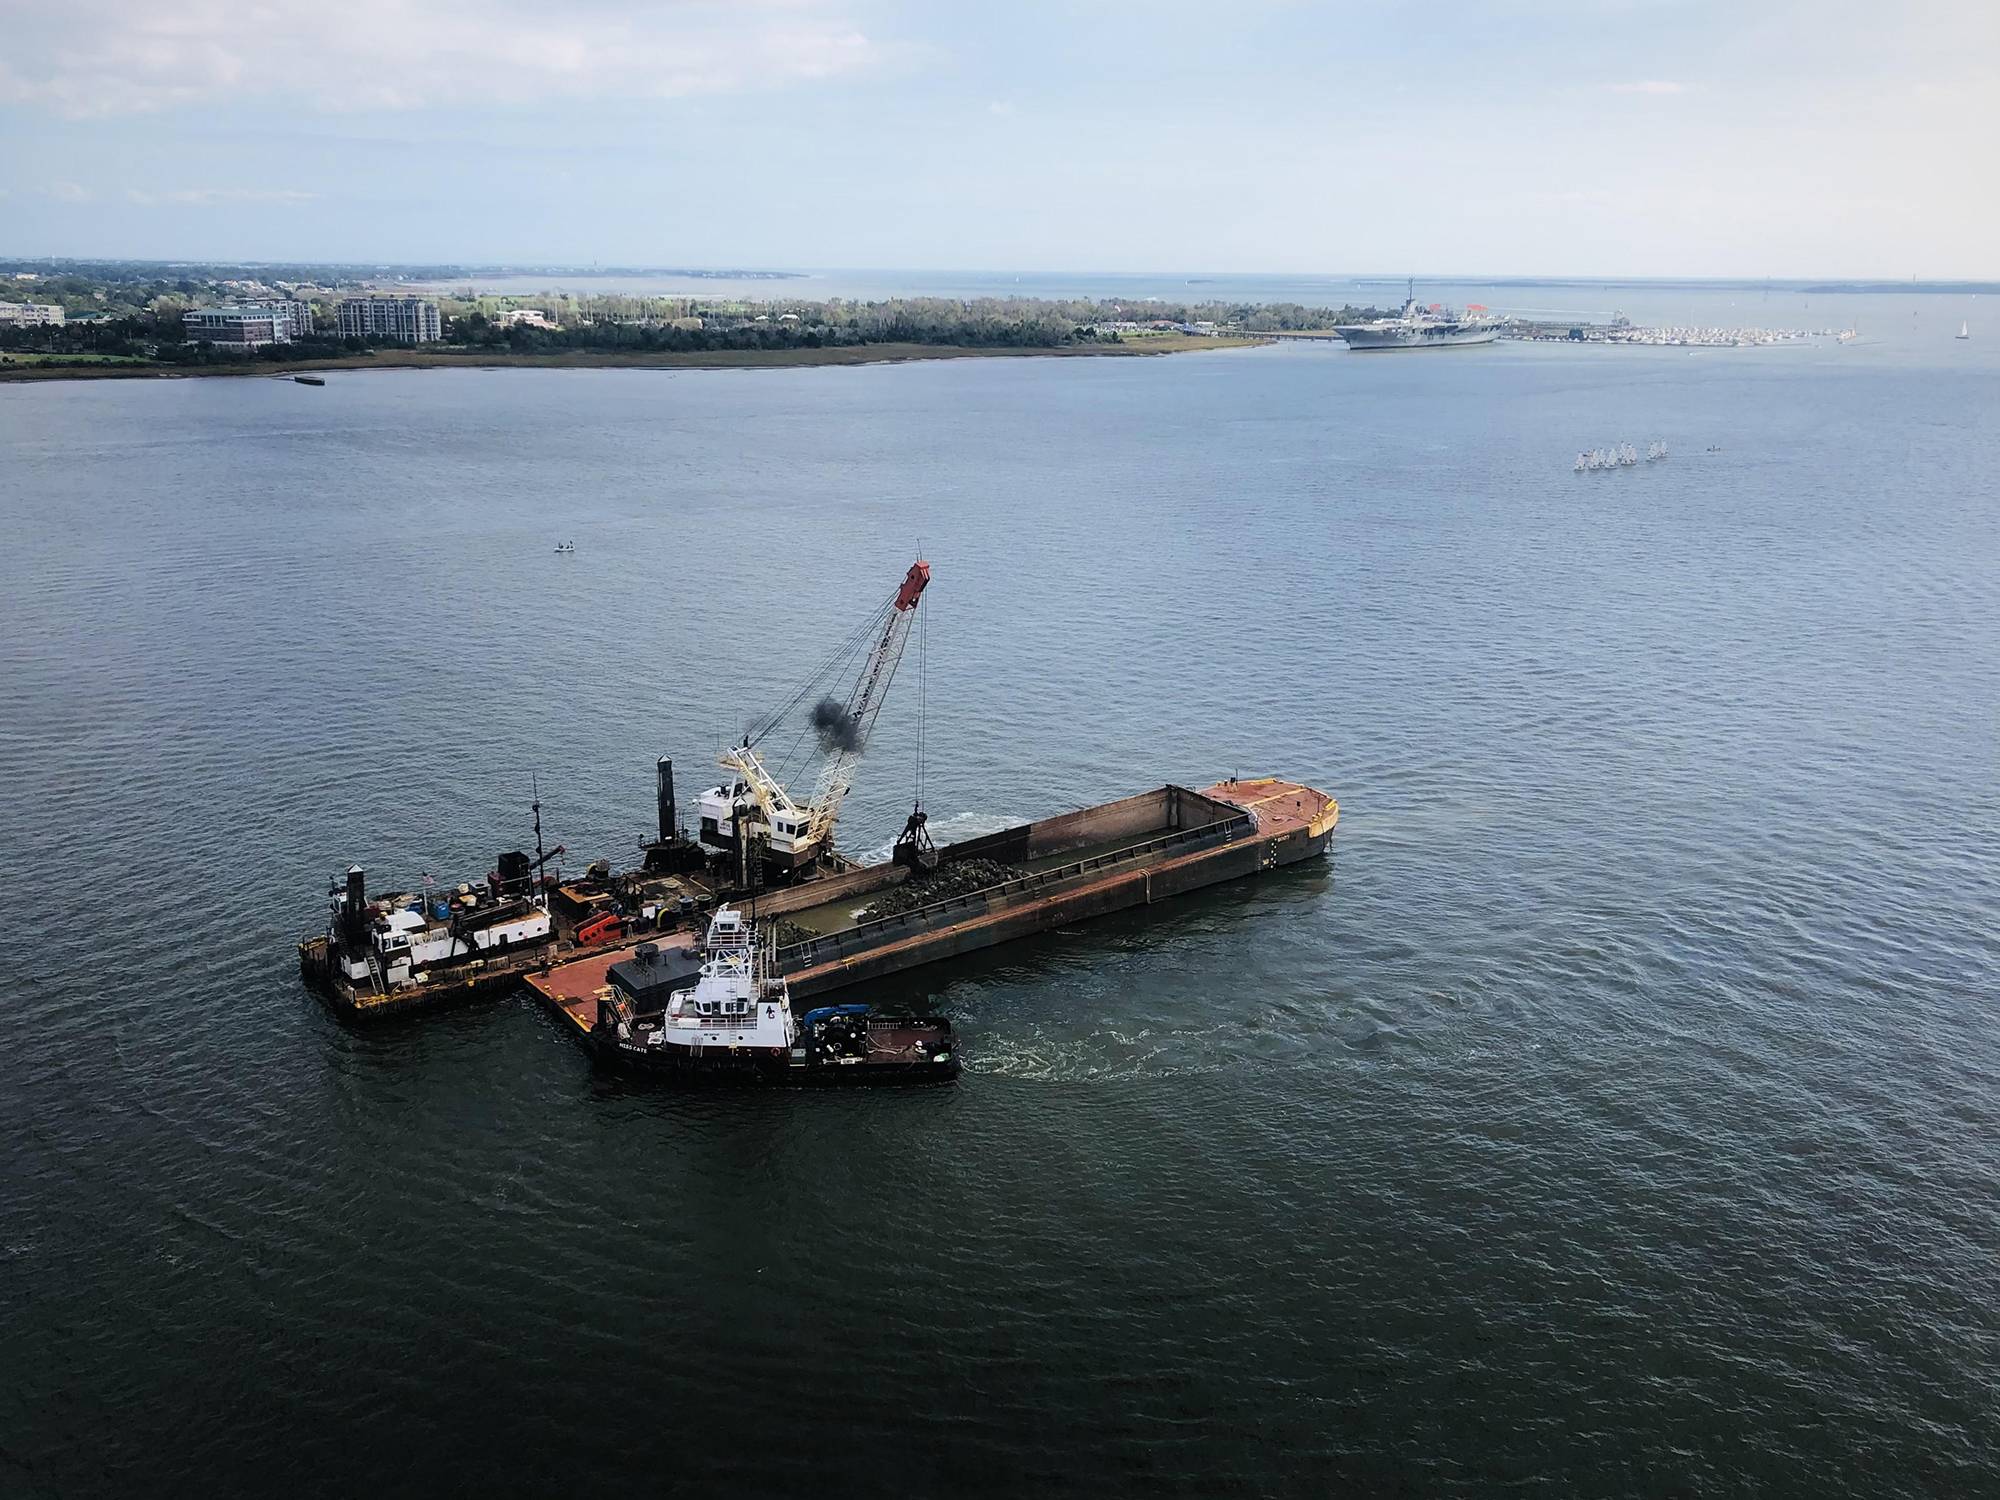 Dredging, ports top list of issues